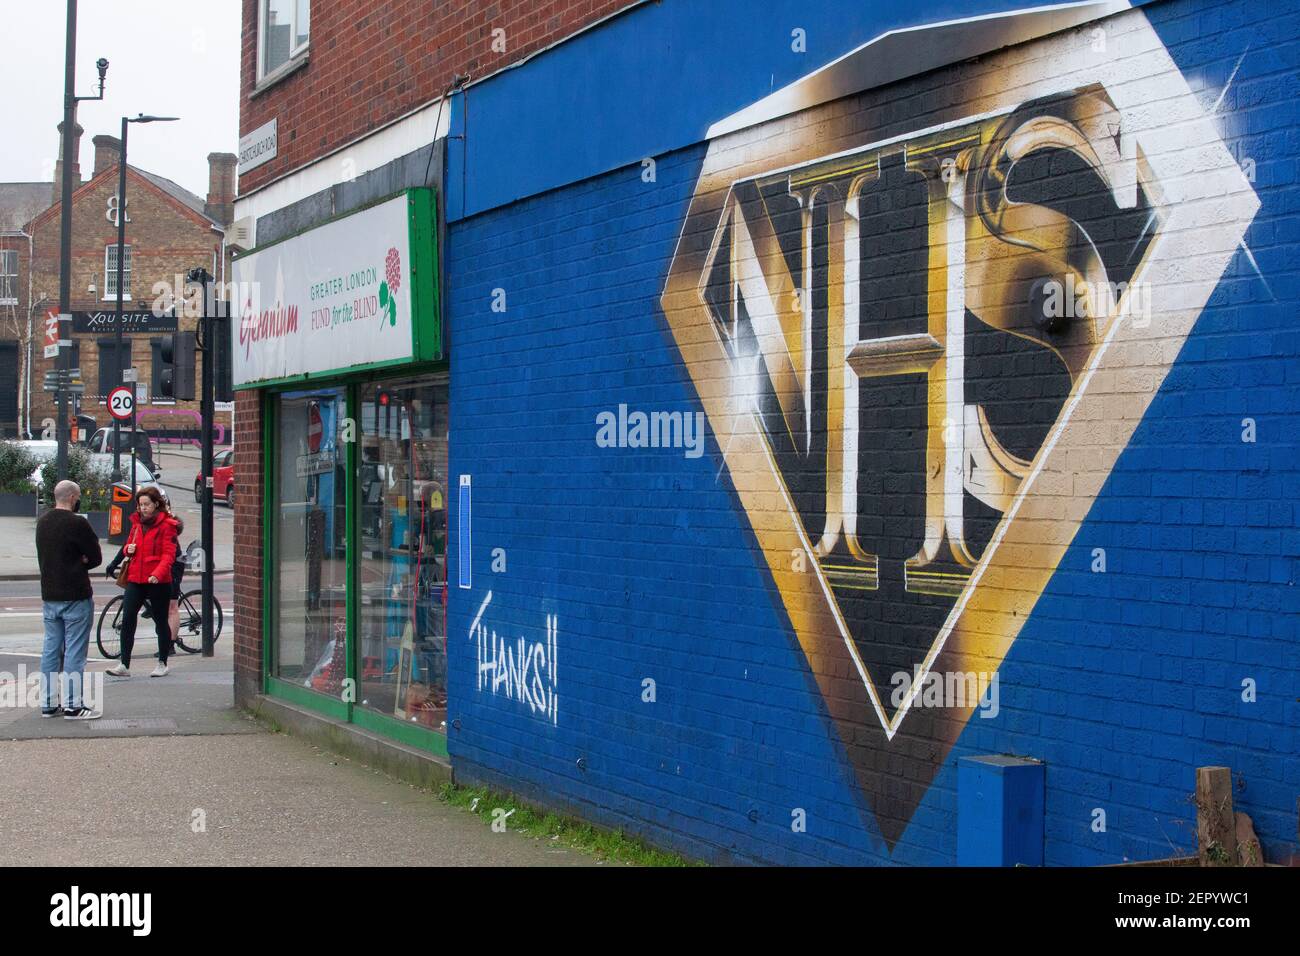 London, UK, 28 February 2021: A mural in Tulse Hill depicts the NHS logo in the style of a superhero badge. Passers-by take exercise or queue for the Co-op store round the corner, some wearing face masks and all socially distancing. Anna Watson/Alamy Live News Stock Photo